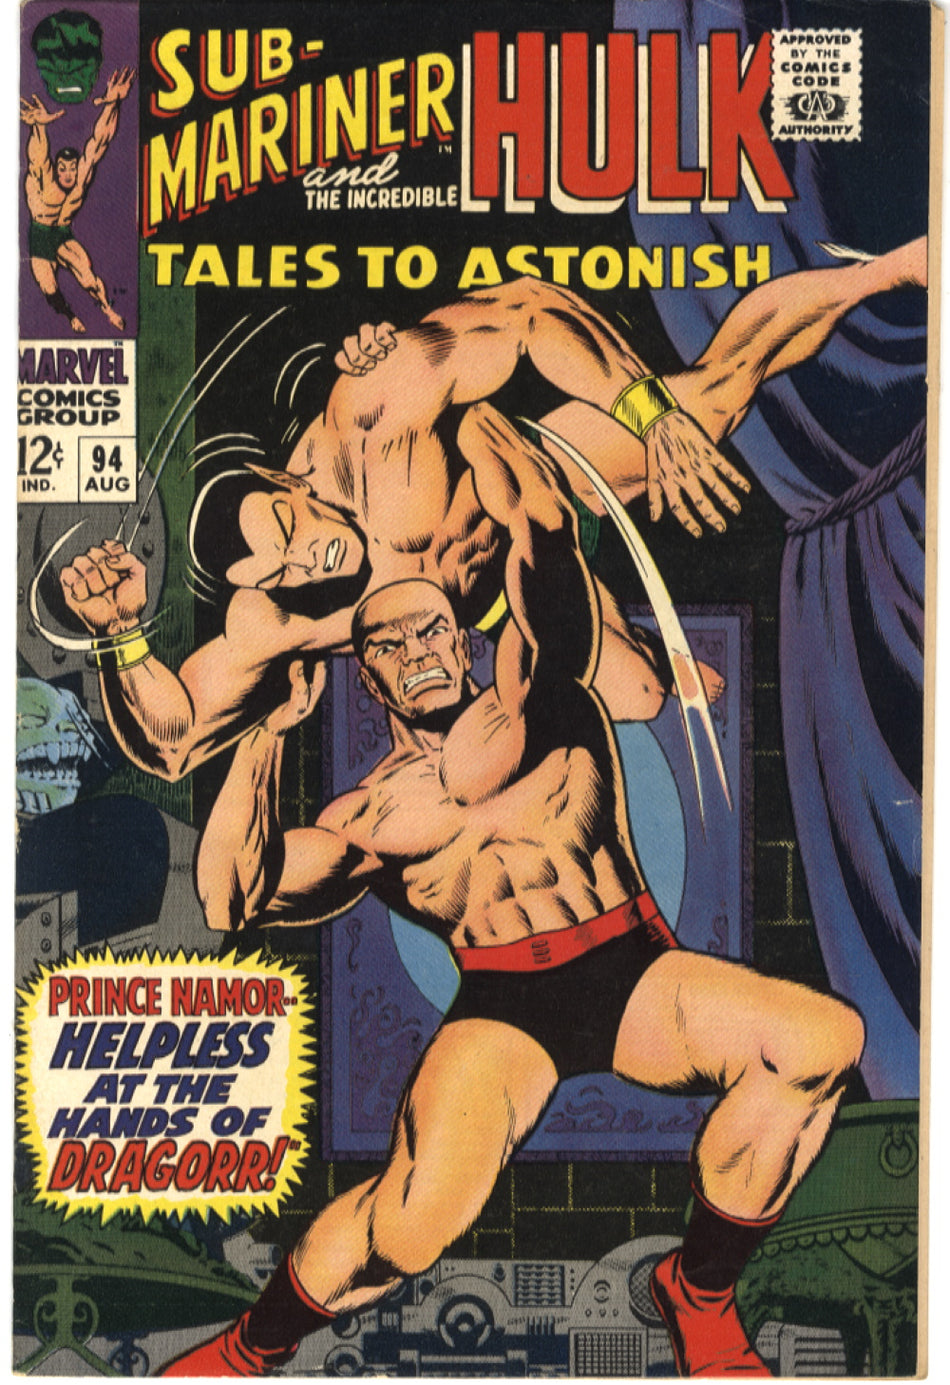 TALES TO ASTONISH 094 VG- (3.5) Trimmed